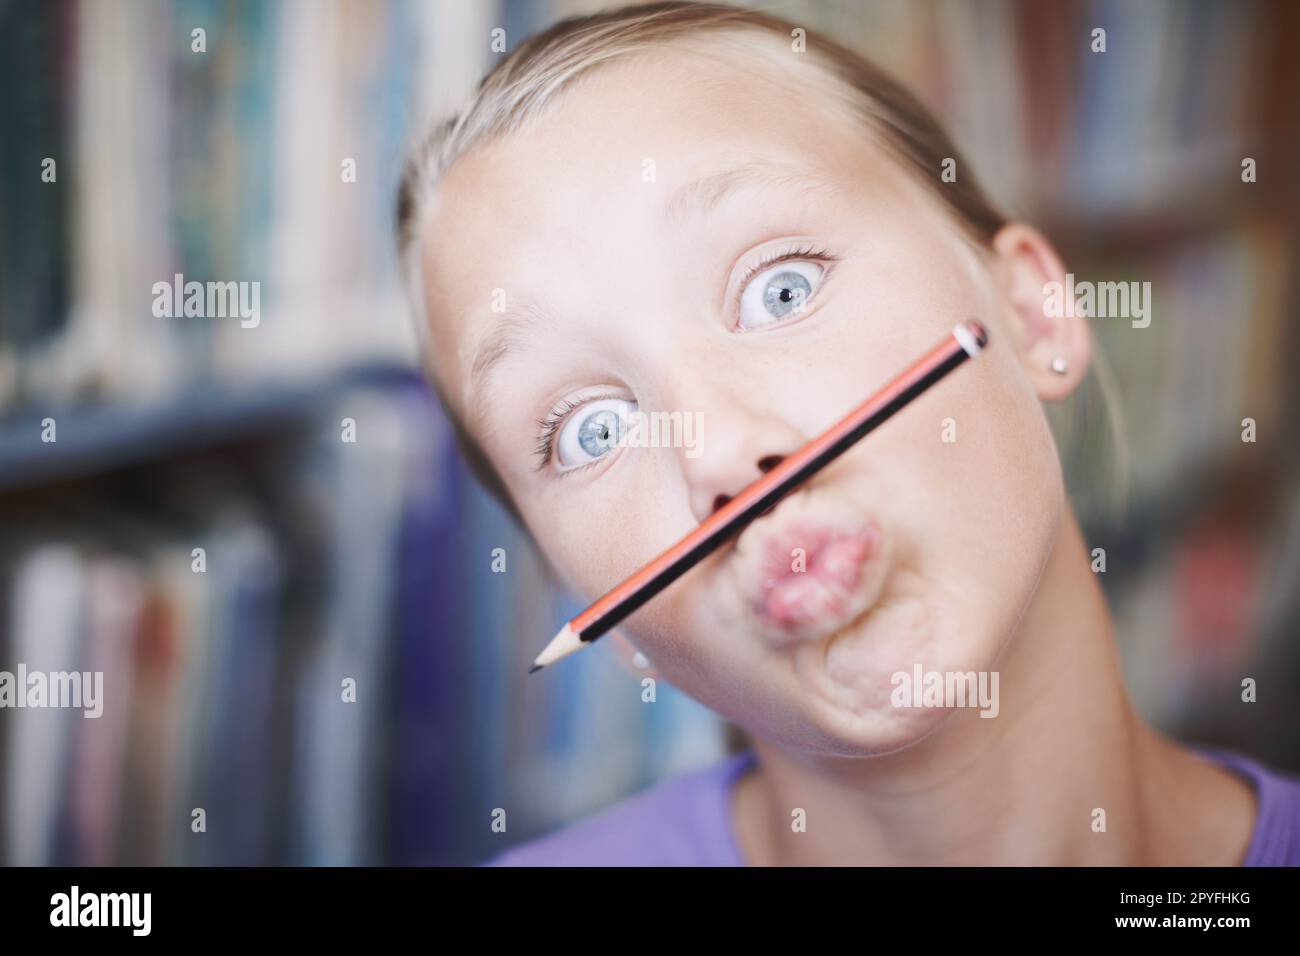 Studying can be a balancing act. A cute young girl balancing her pencil on her lips and pulling a face. Stock Photo